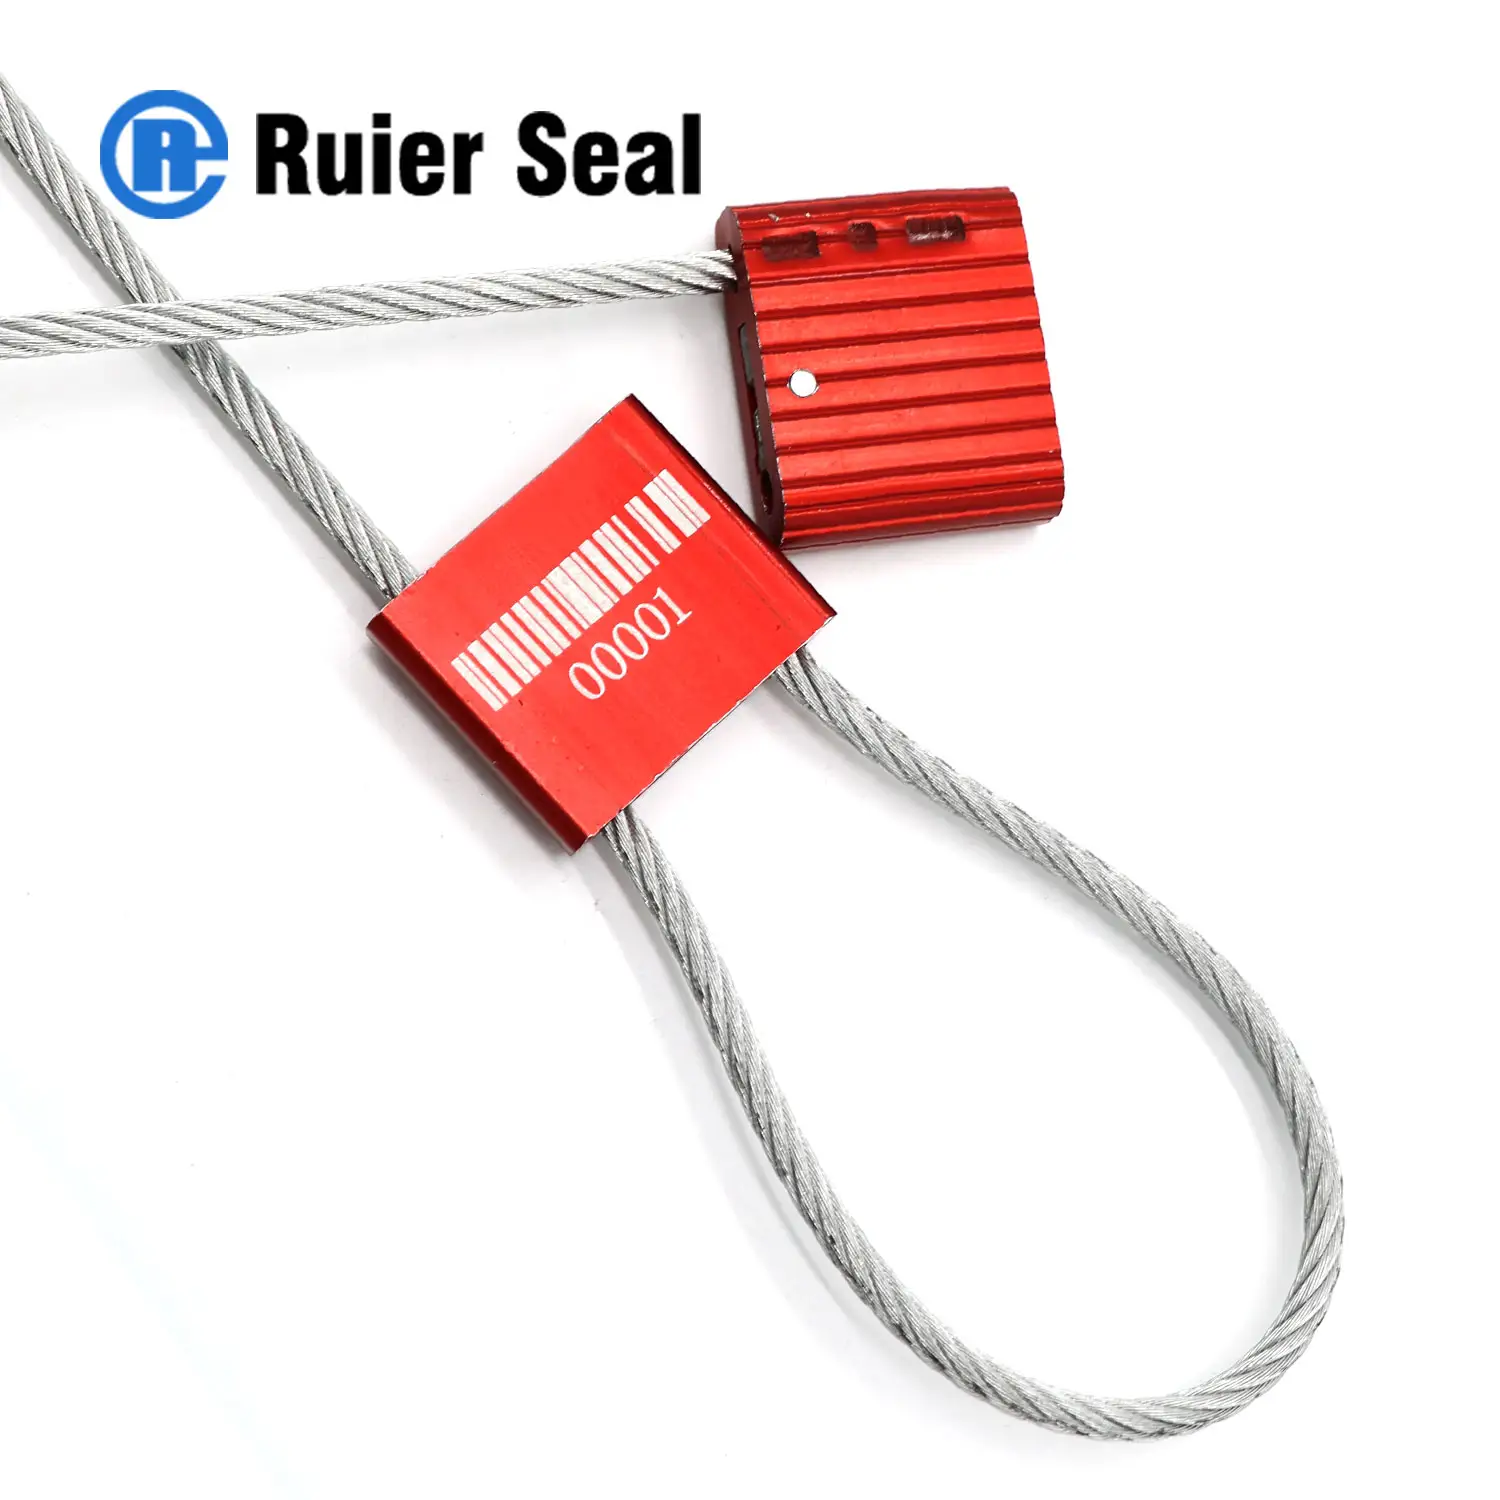 REC105 cable seal for container wire safety container cable seal